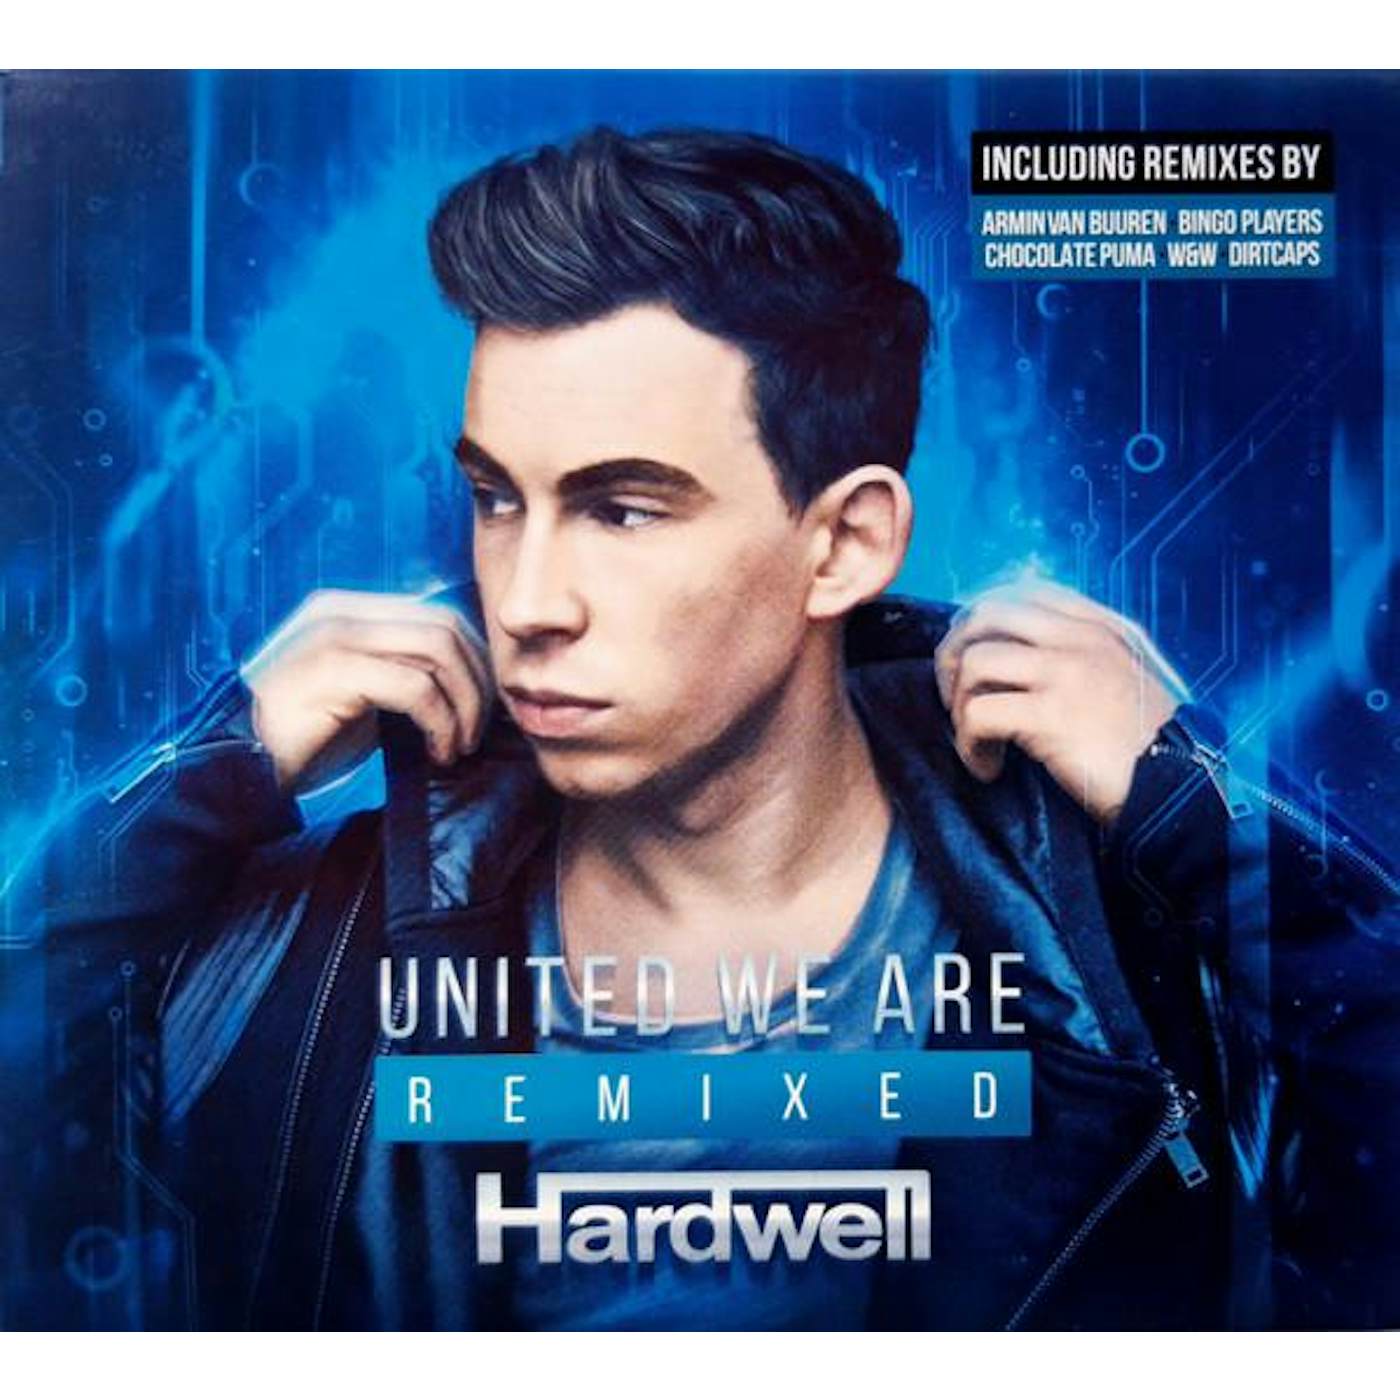 Hardwell UNITED WE ARE: REMIXED CD